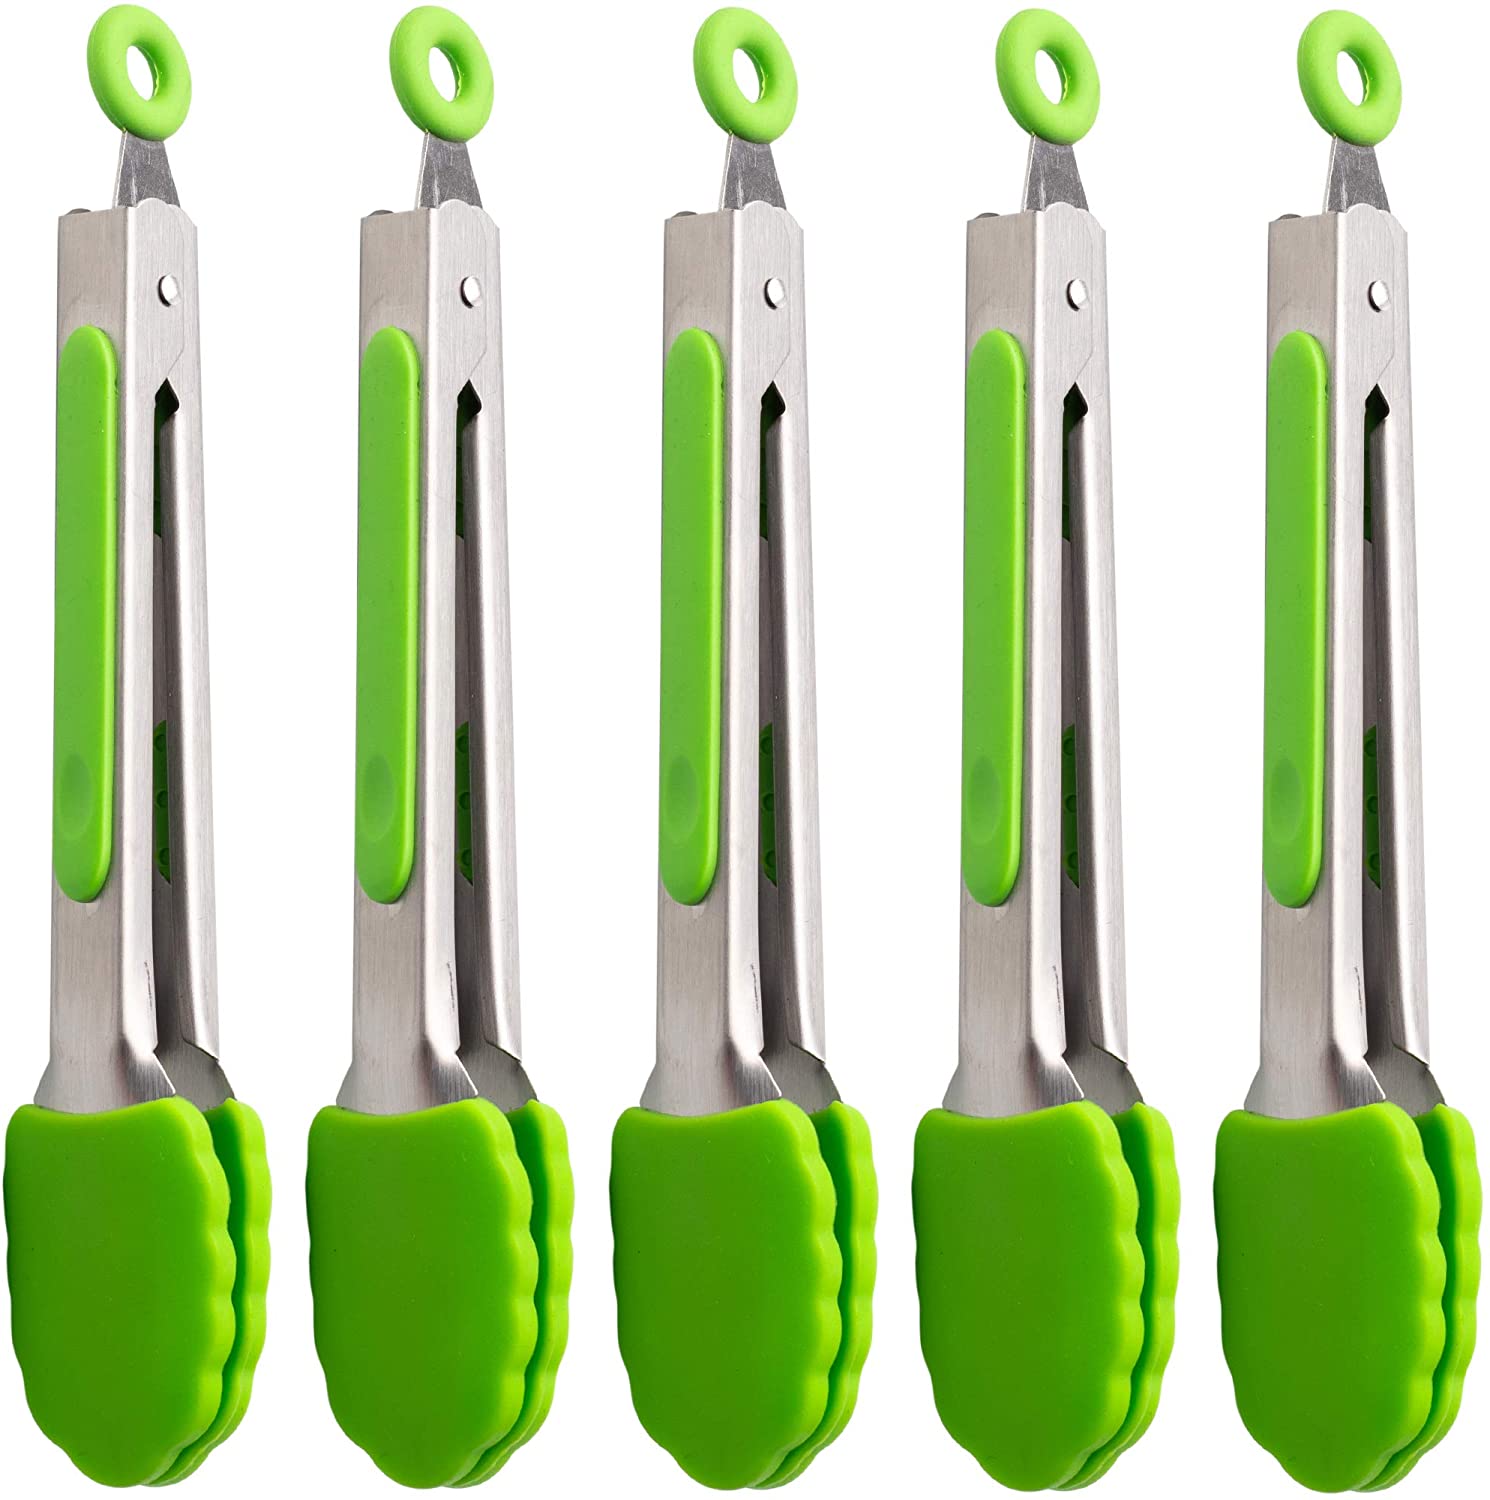 Mini Tongs with Silicone Tips 7-Inch Kitchen Tongs Set of 3 Black